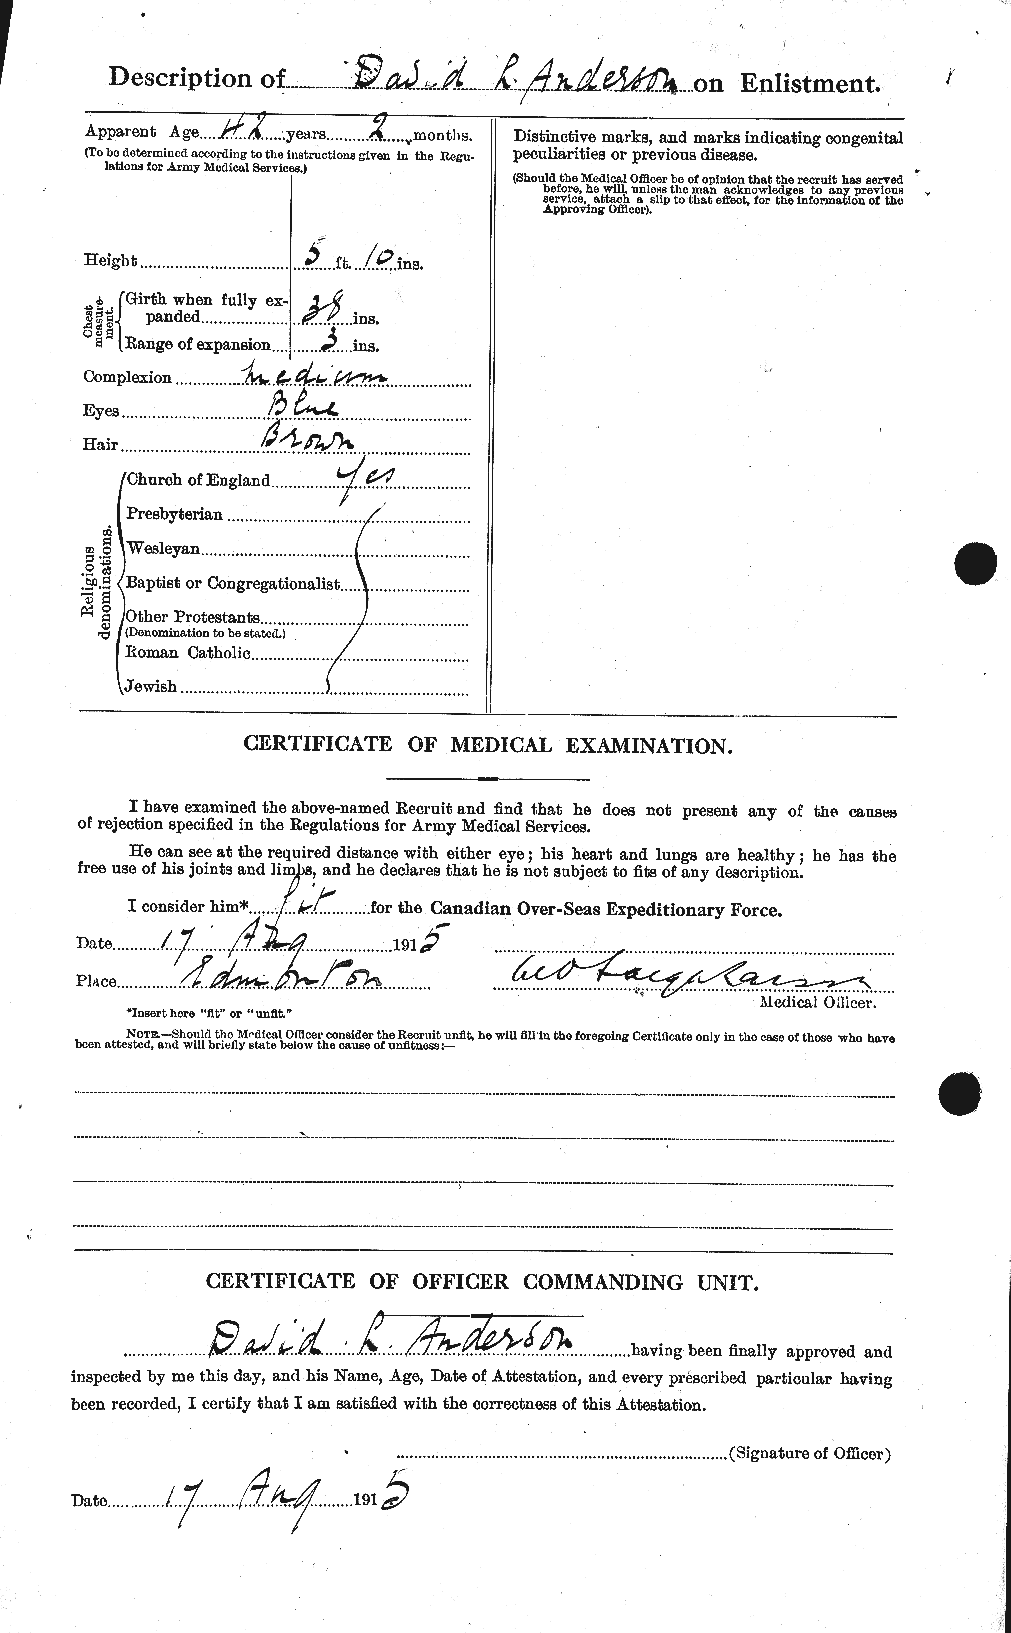 Personnel Records of the First World War - CEF 210009b